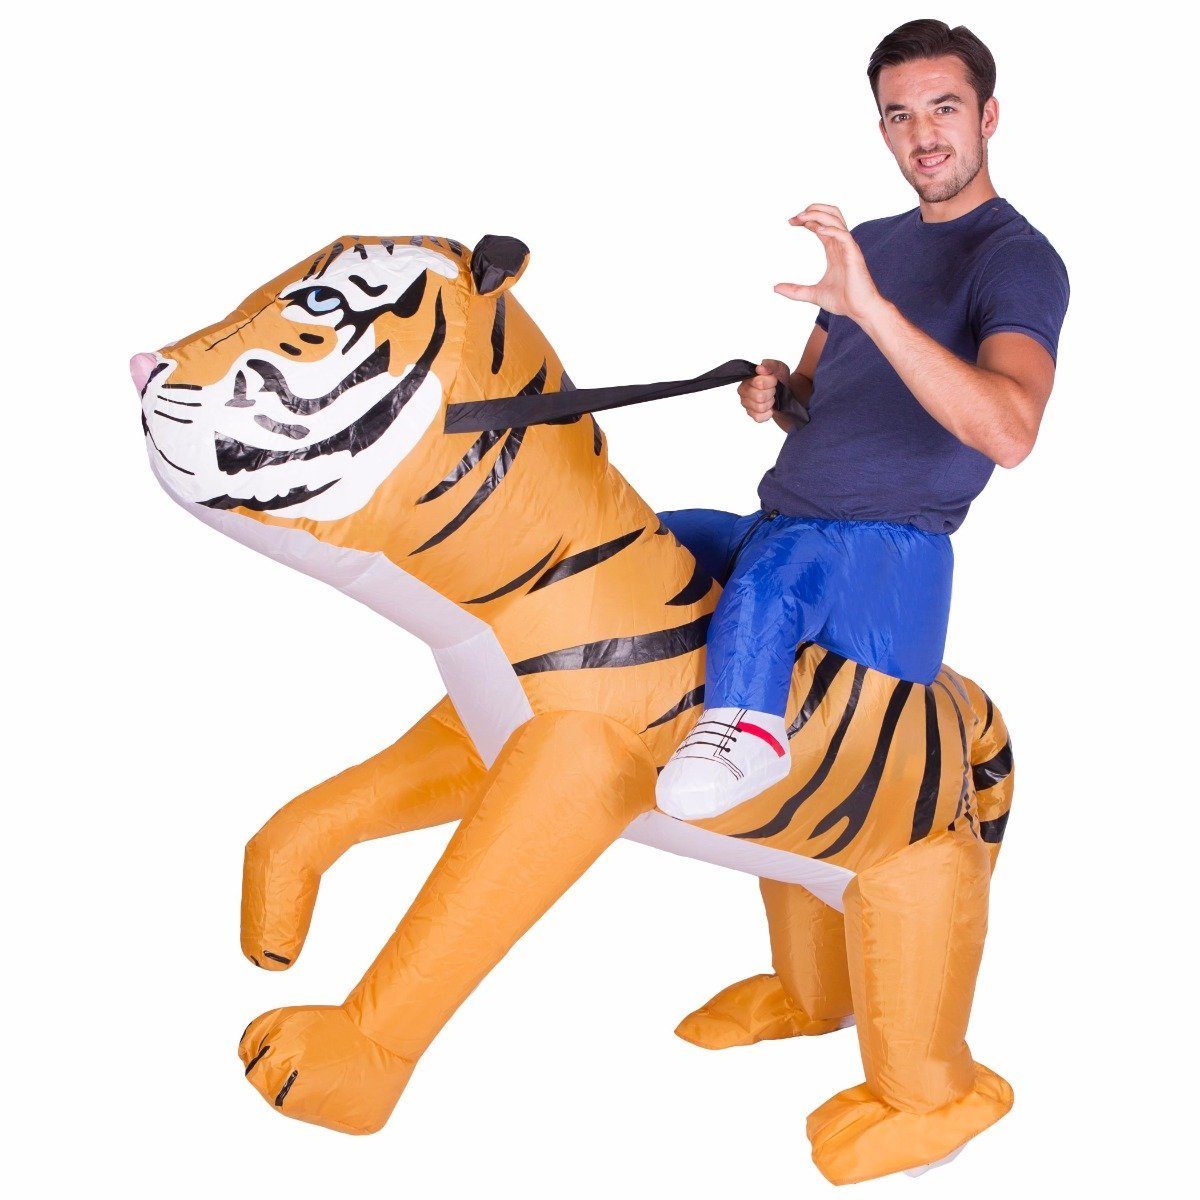 Inflatable Ride-On Tiger Costume